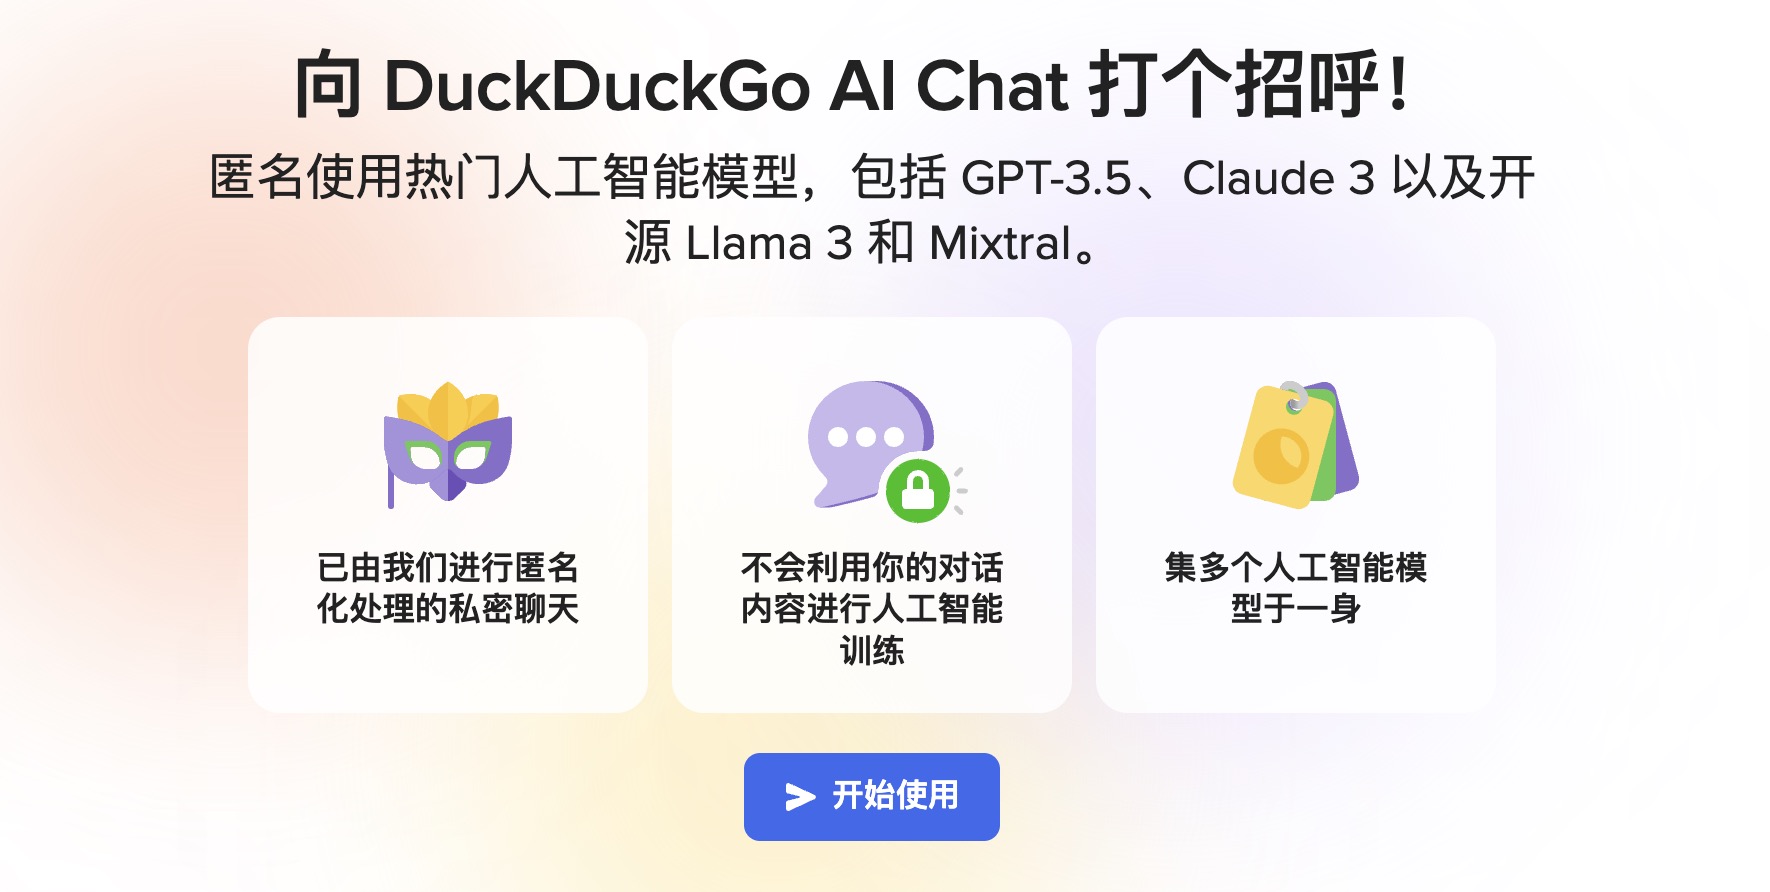 'DuckDuckGo Launches Private AI Chatbot: Untraceable, Data-Secure with GPT-3.5 Turbo & Claude 3 Support'